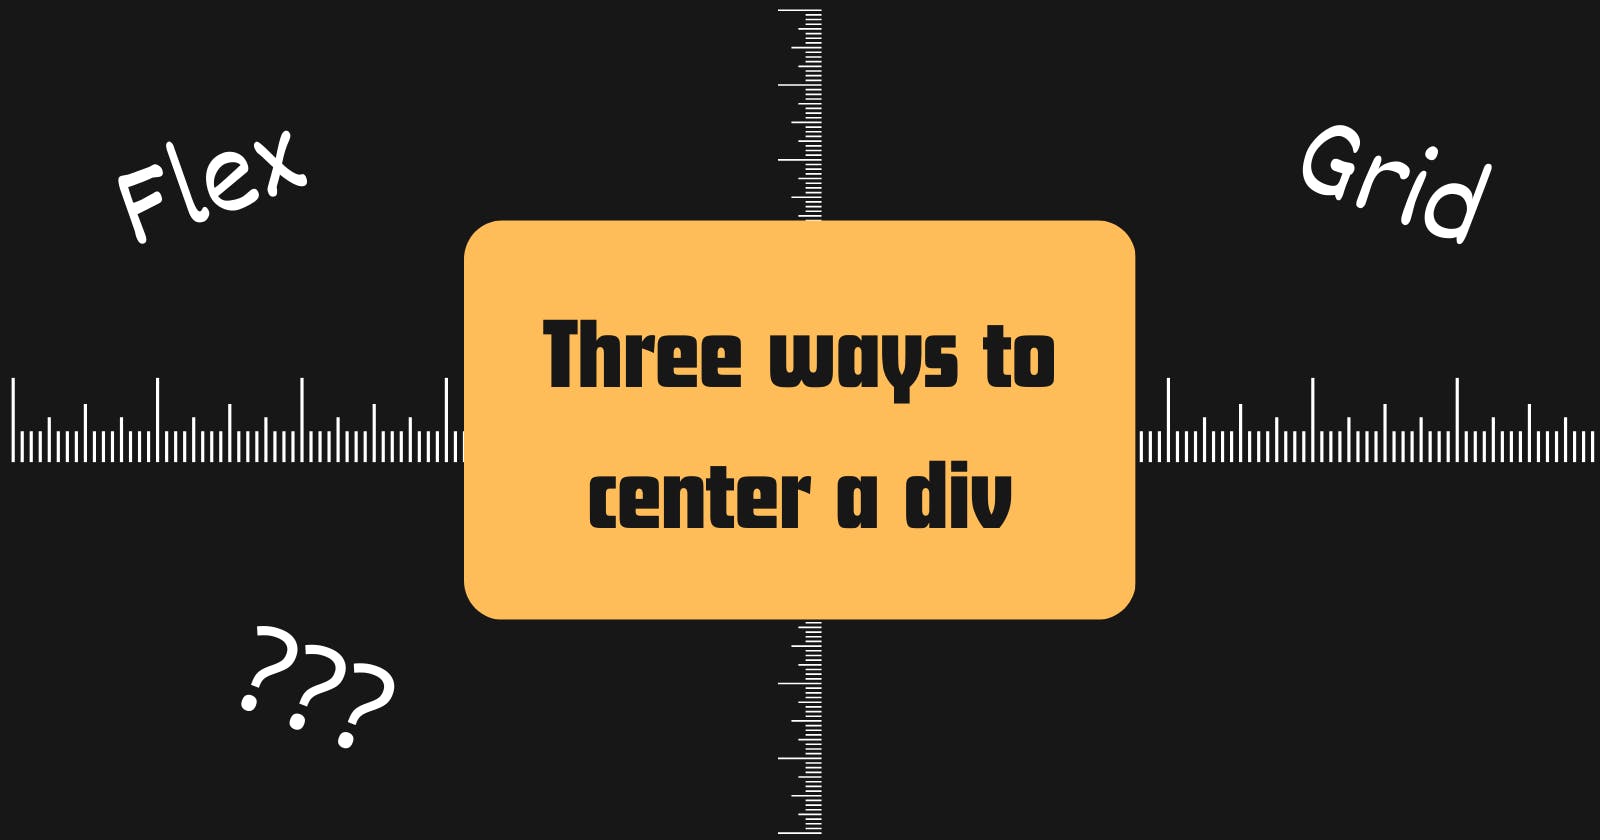 Different ways to center a div